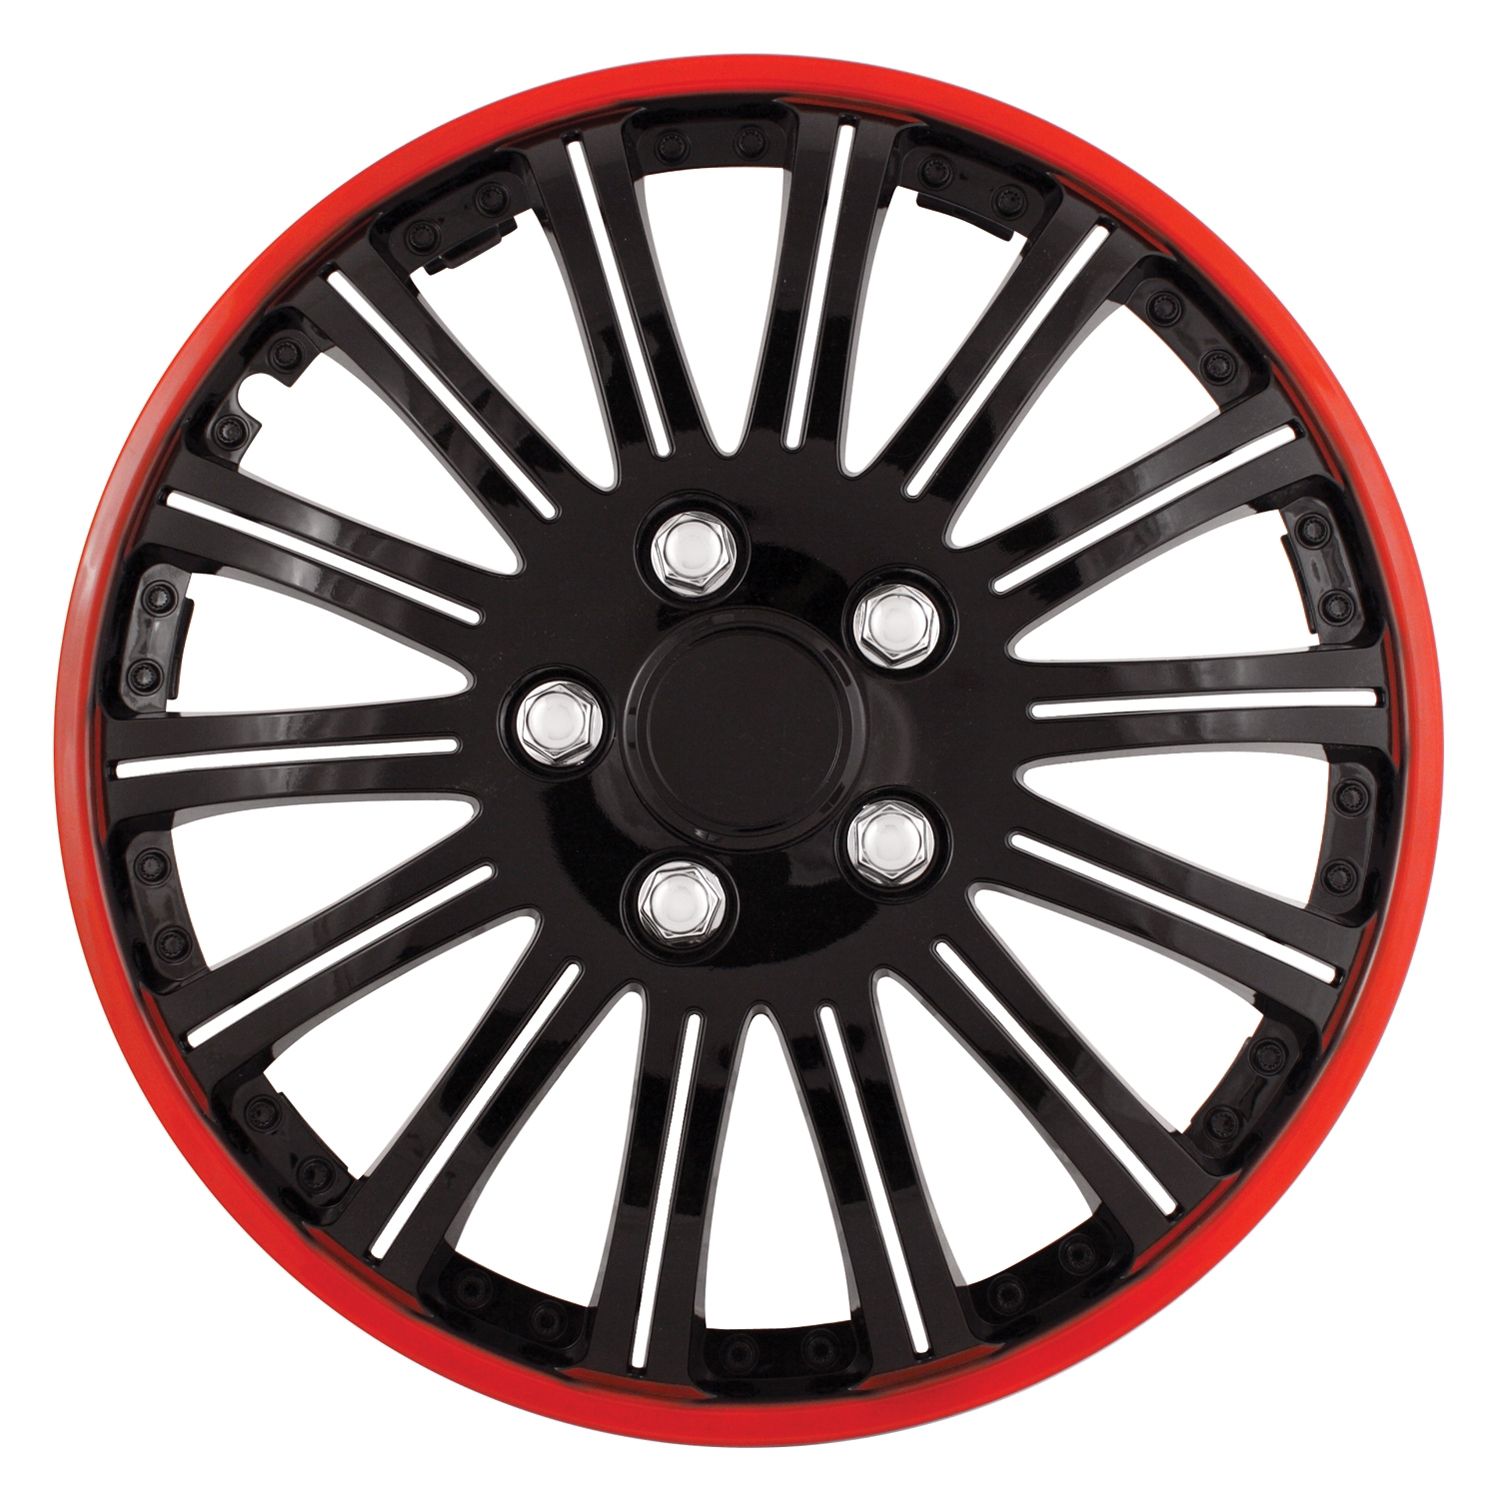 Wheel cover, Red & Black, 15 inch